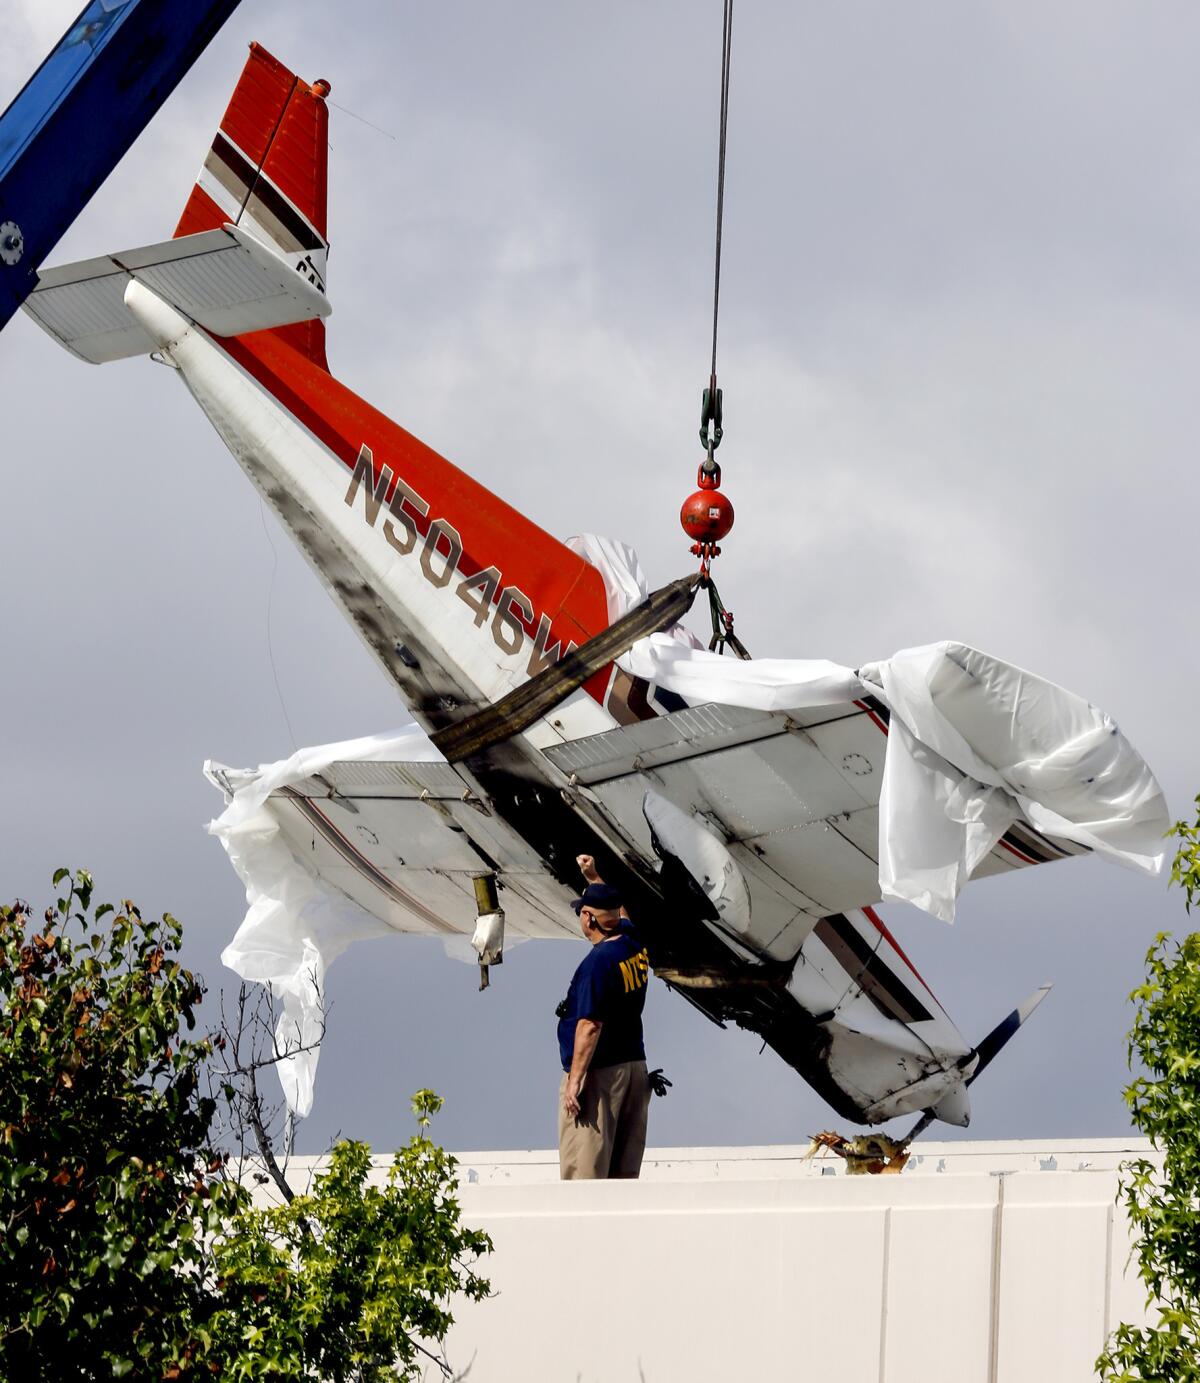 An agent with the National Transportation Safety Board guides a crane operator during the removal of a Piper PA-28 Cherokee from the roof of a building in Pomona on Monday.